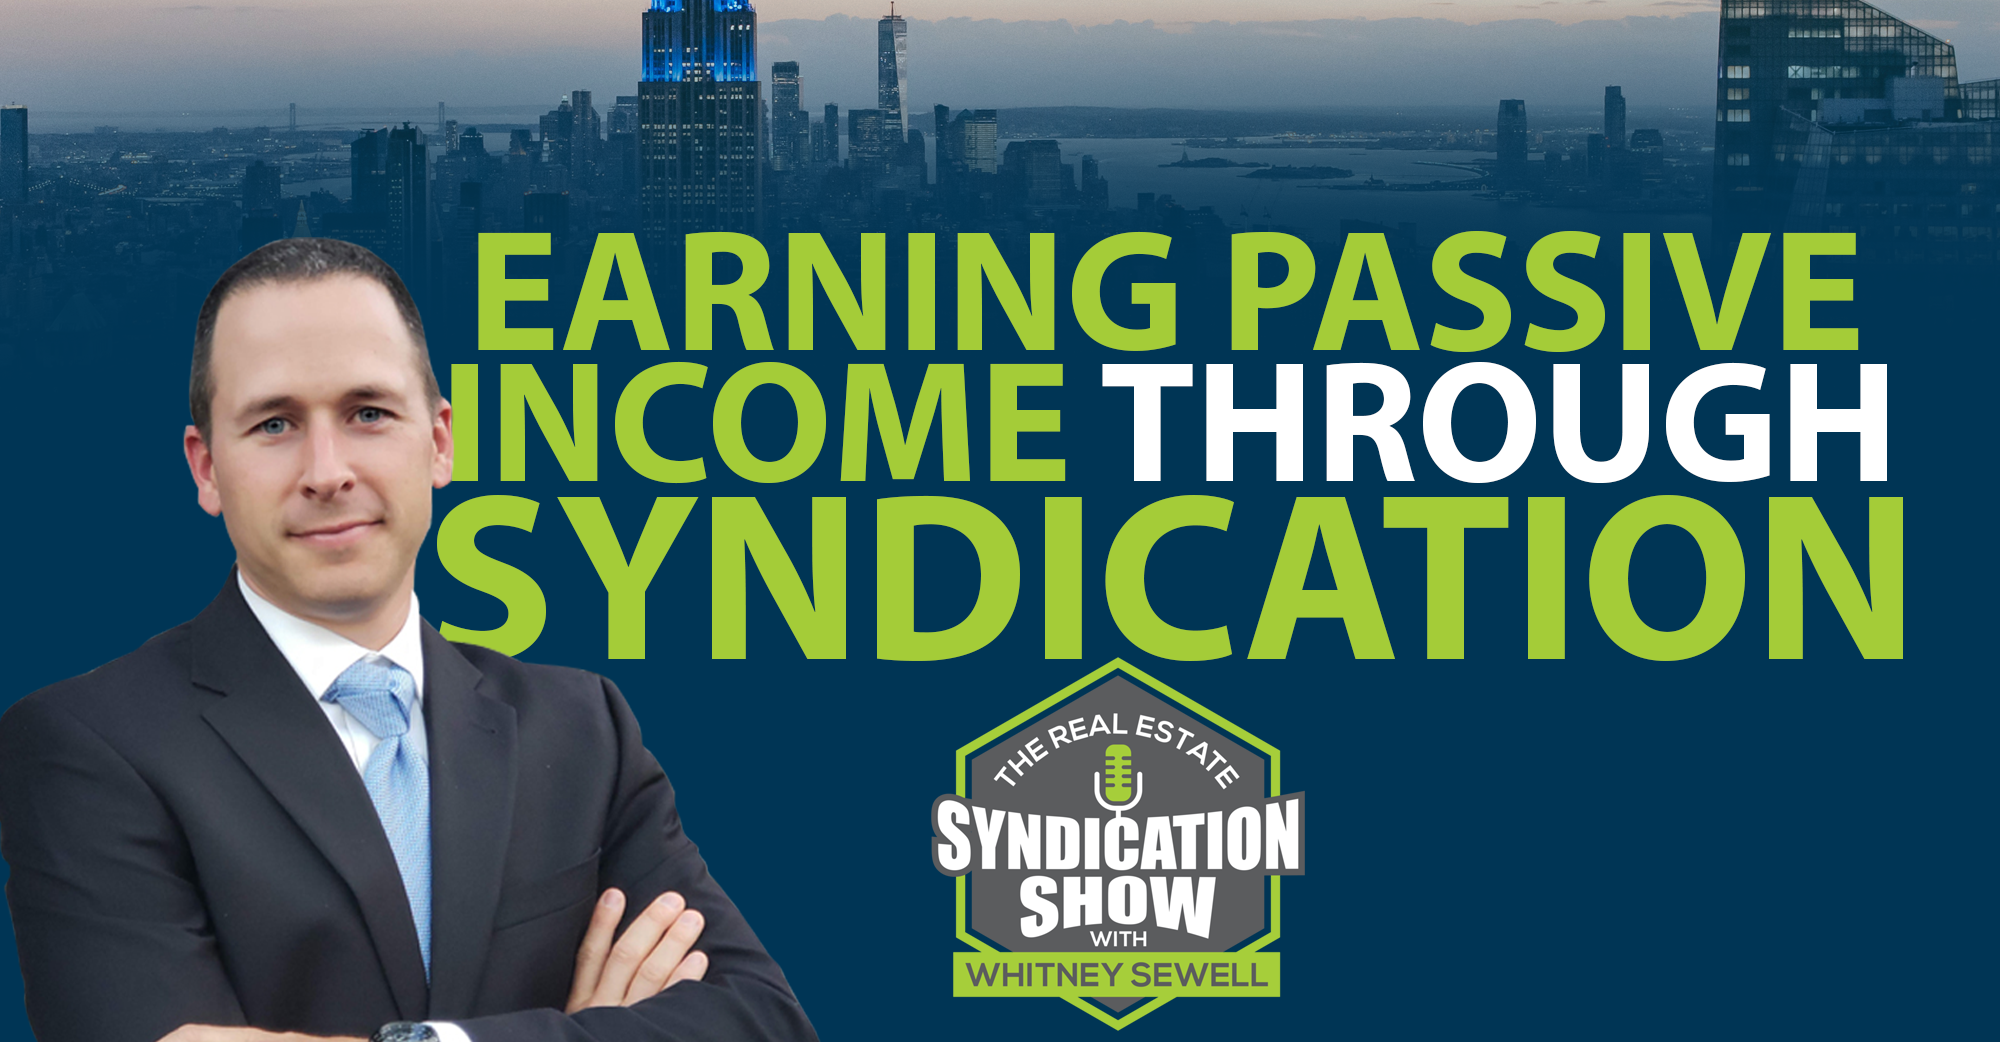 Earning Passive Income Through Syndication